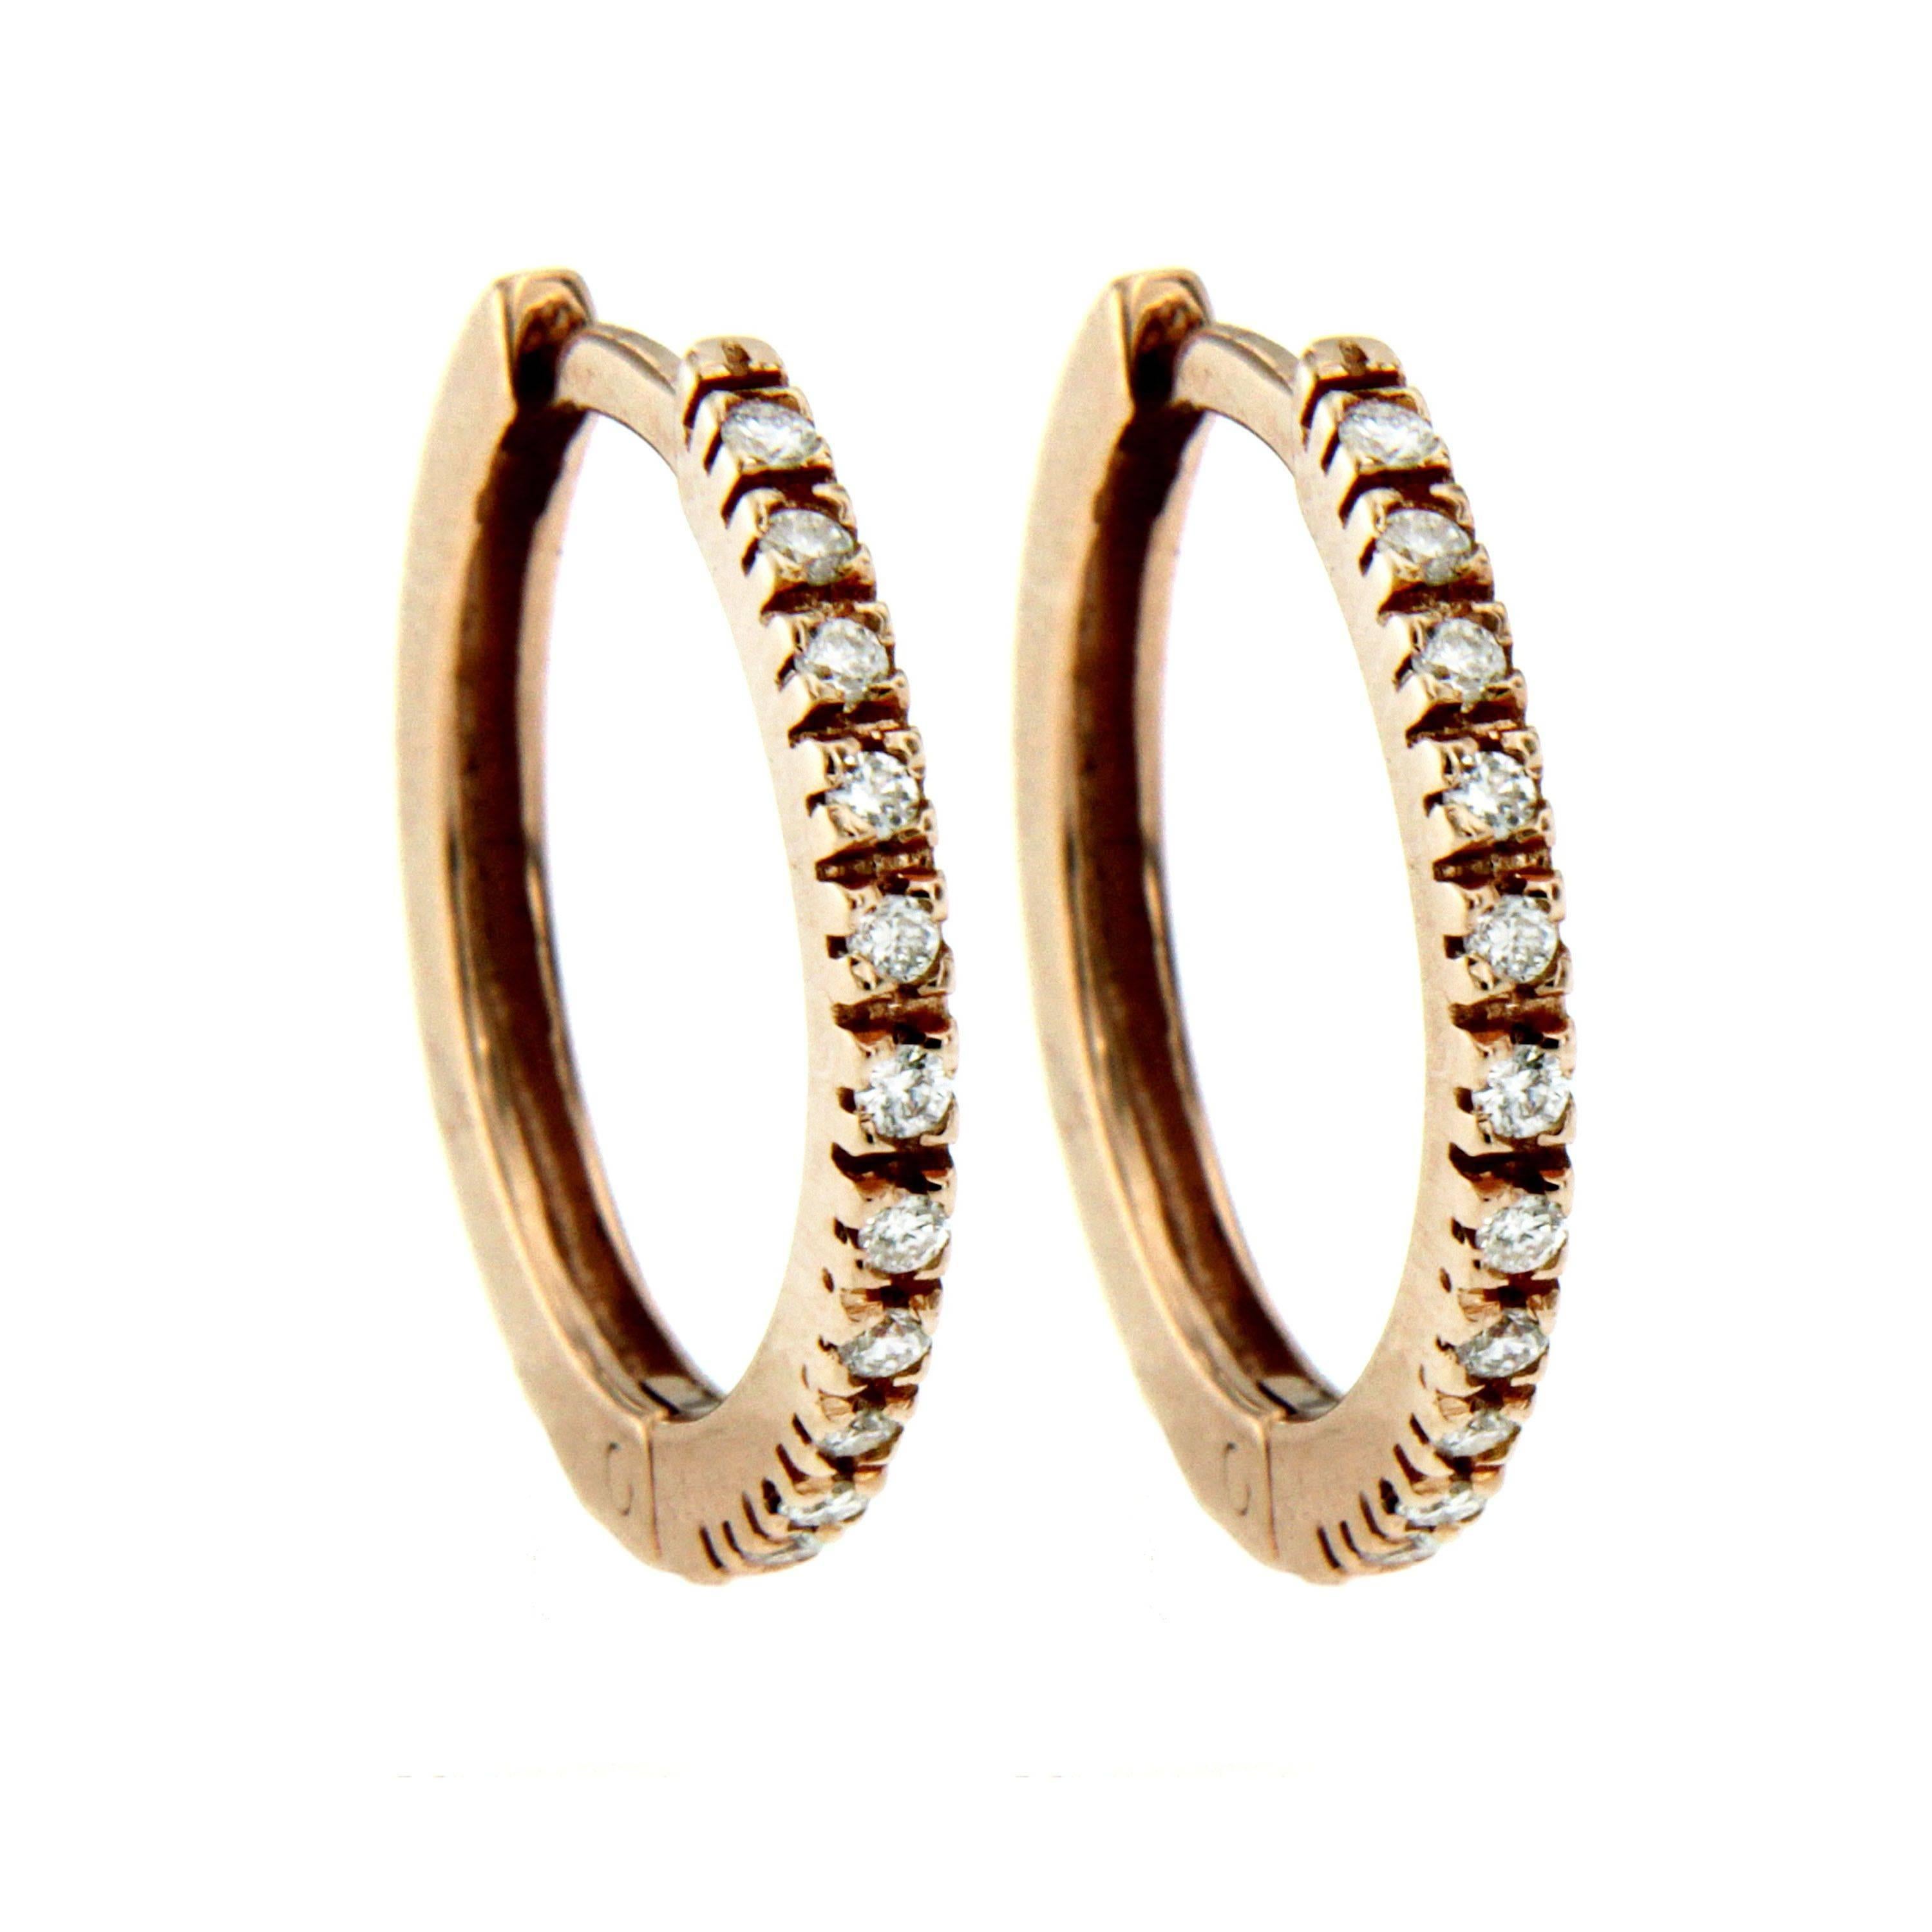 These hoop earrings are crafted in Italy from 18k rose gold and embellished with 0.15-carats of sparkling diamonds. The delicate size makes them perfect for every day.

These earrings are from our own production, possibility to custom yours choosing